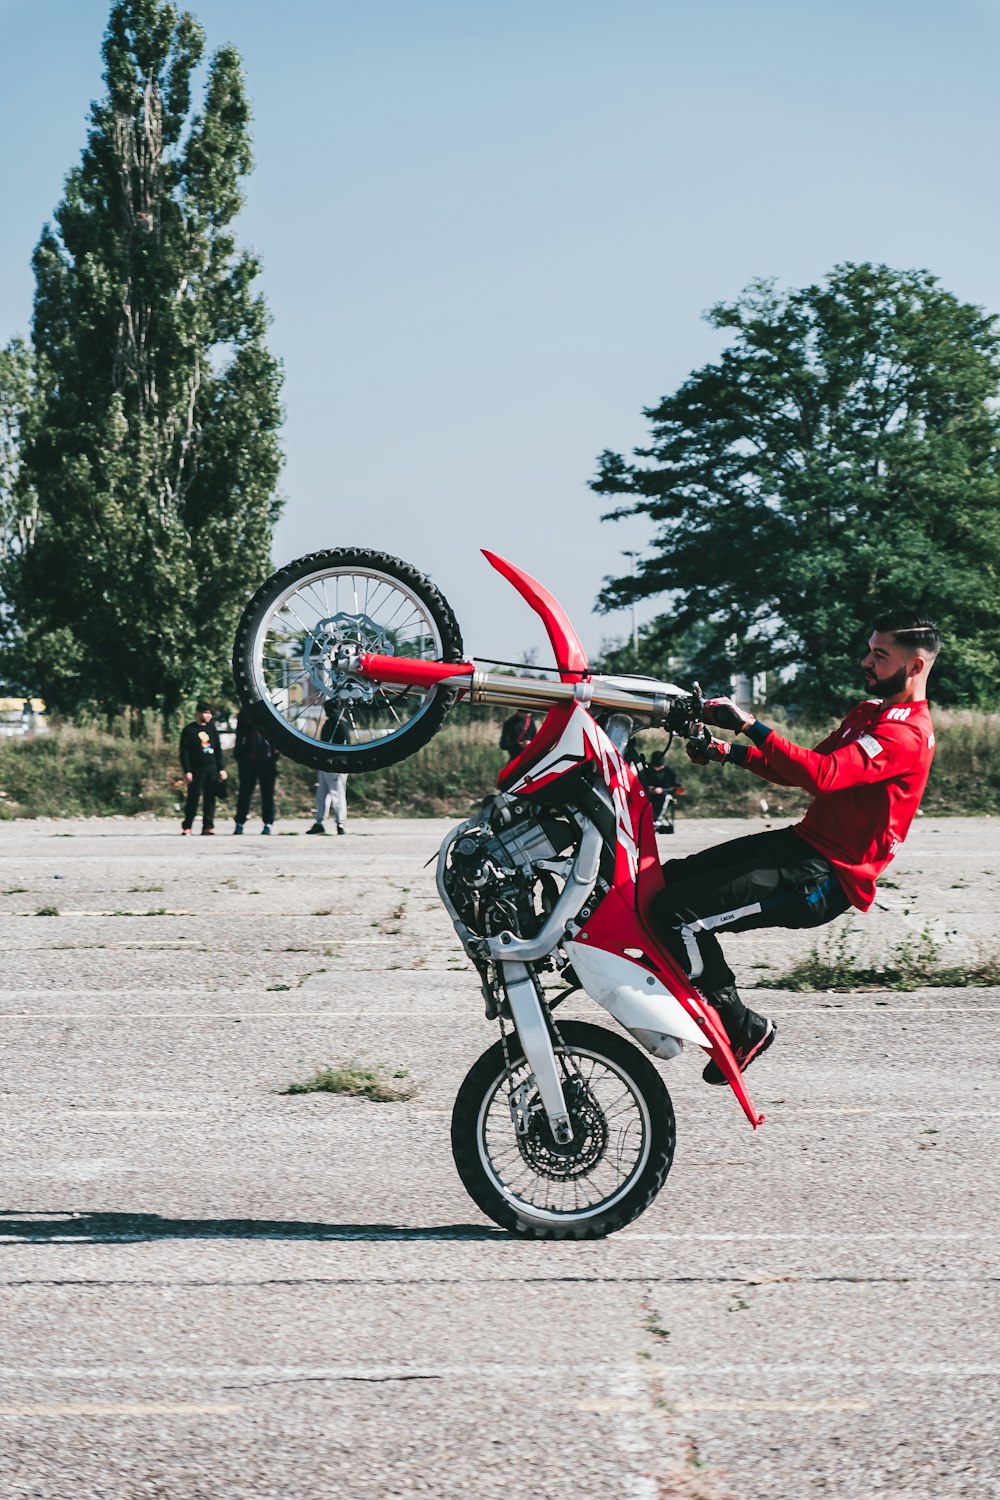 a man is doing a wheelie on a motorcycle